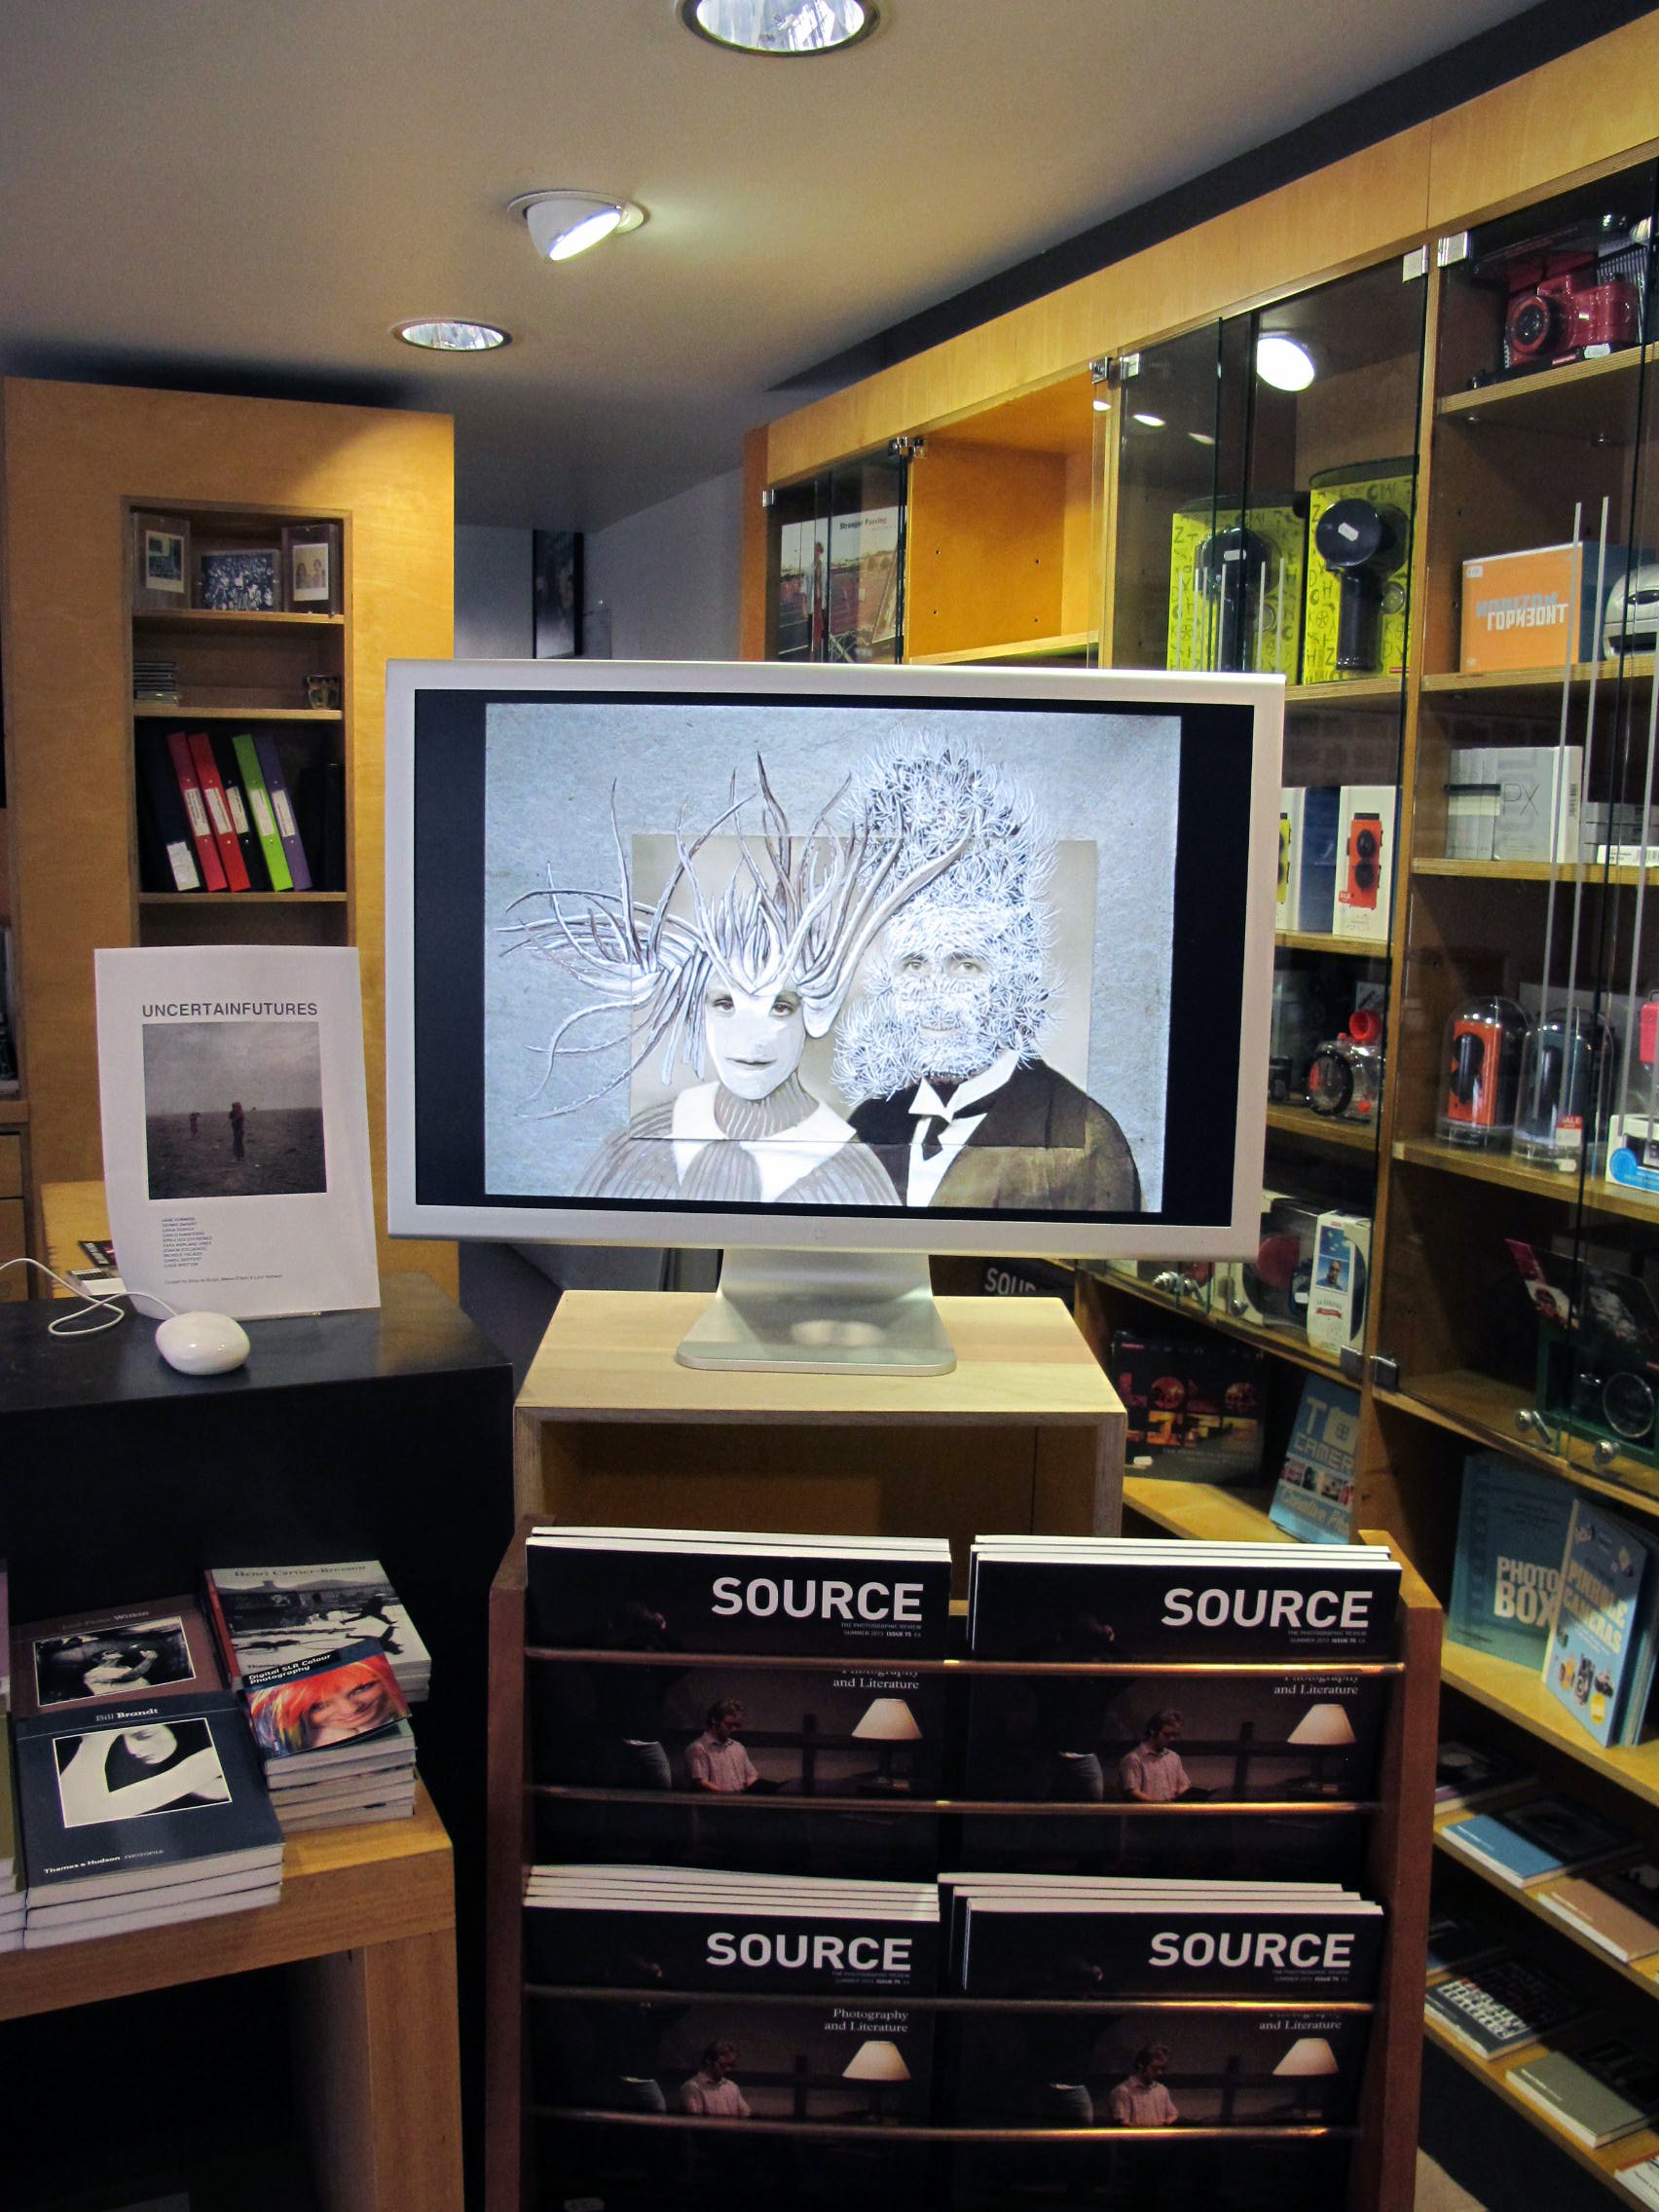  The Slideshow in the Gallery of Photography Ireland’s Bookshop 